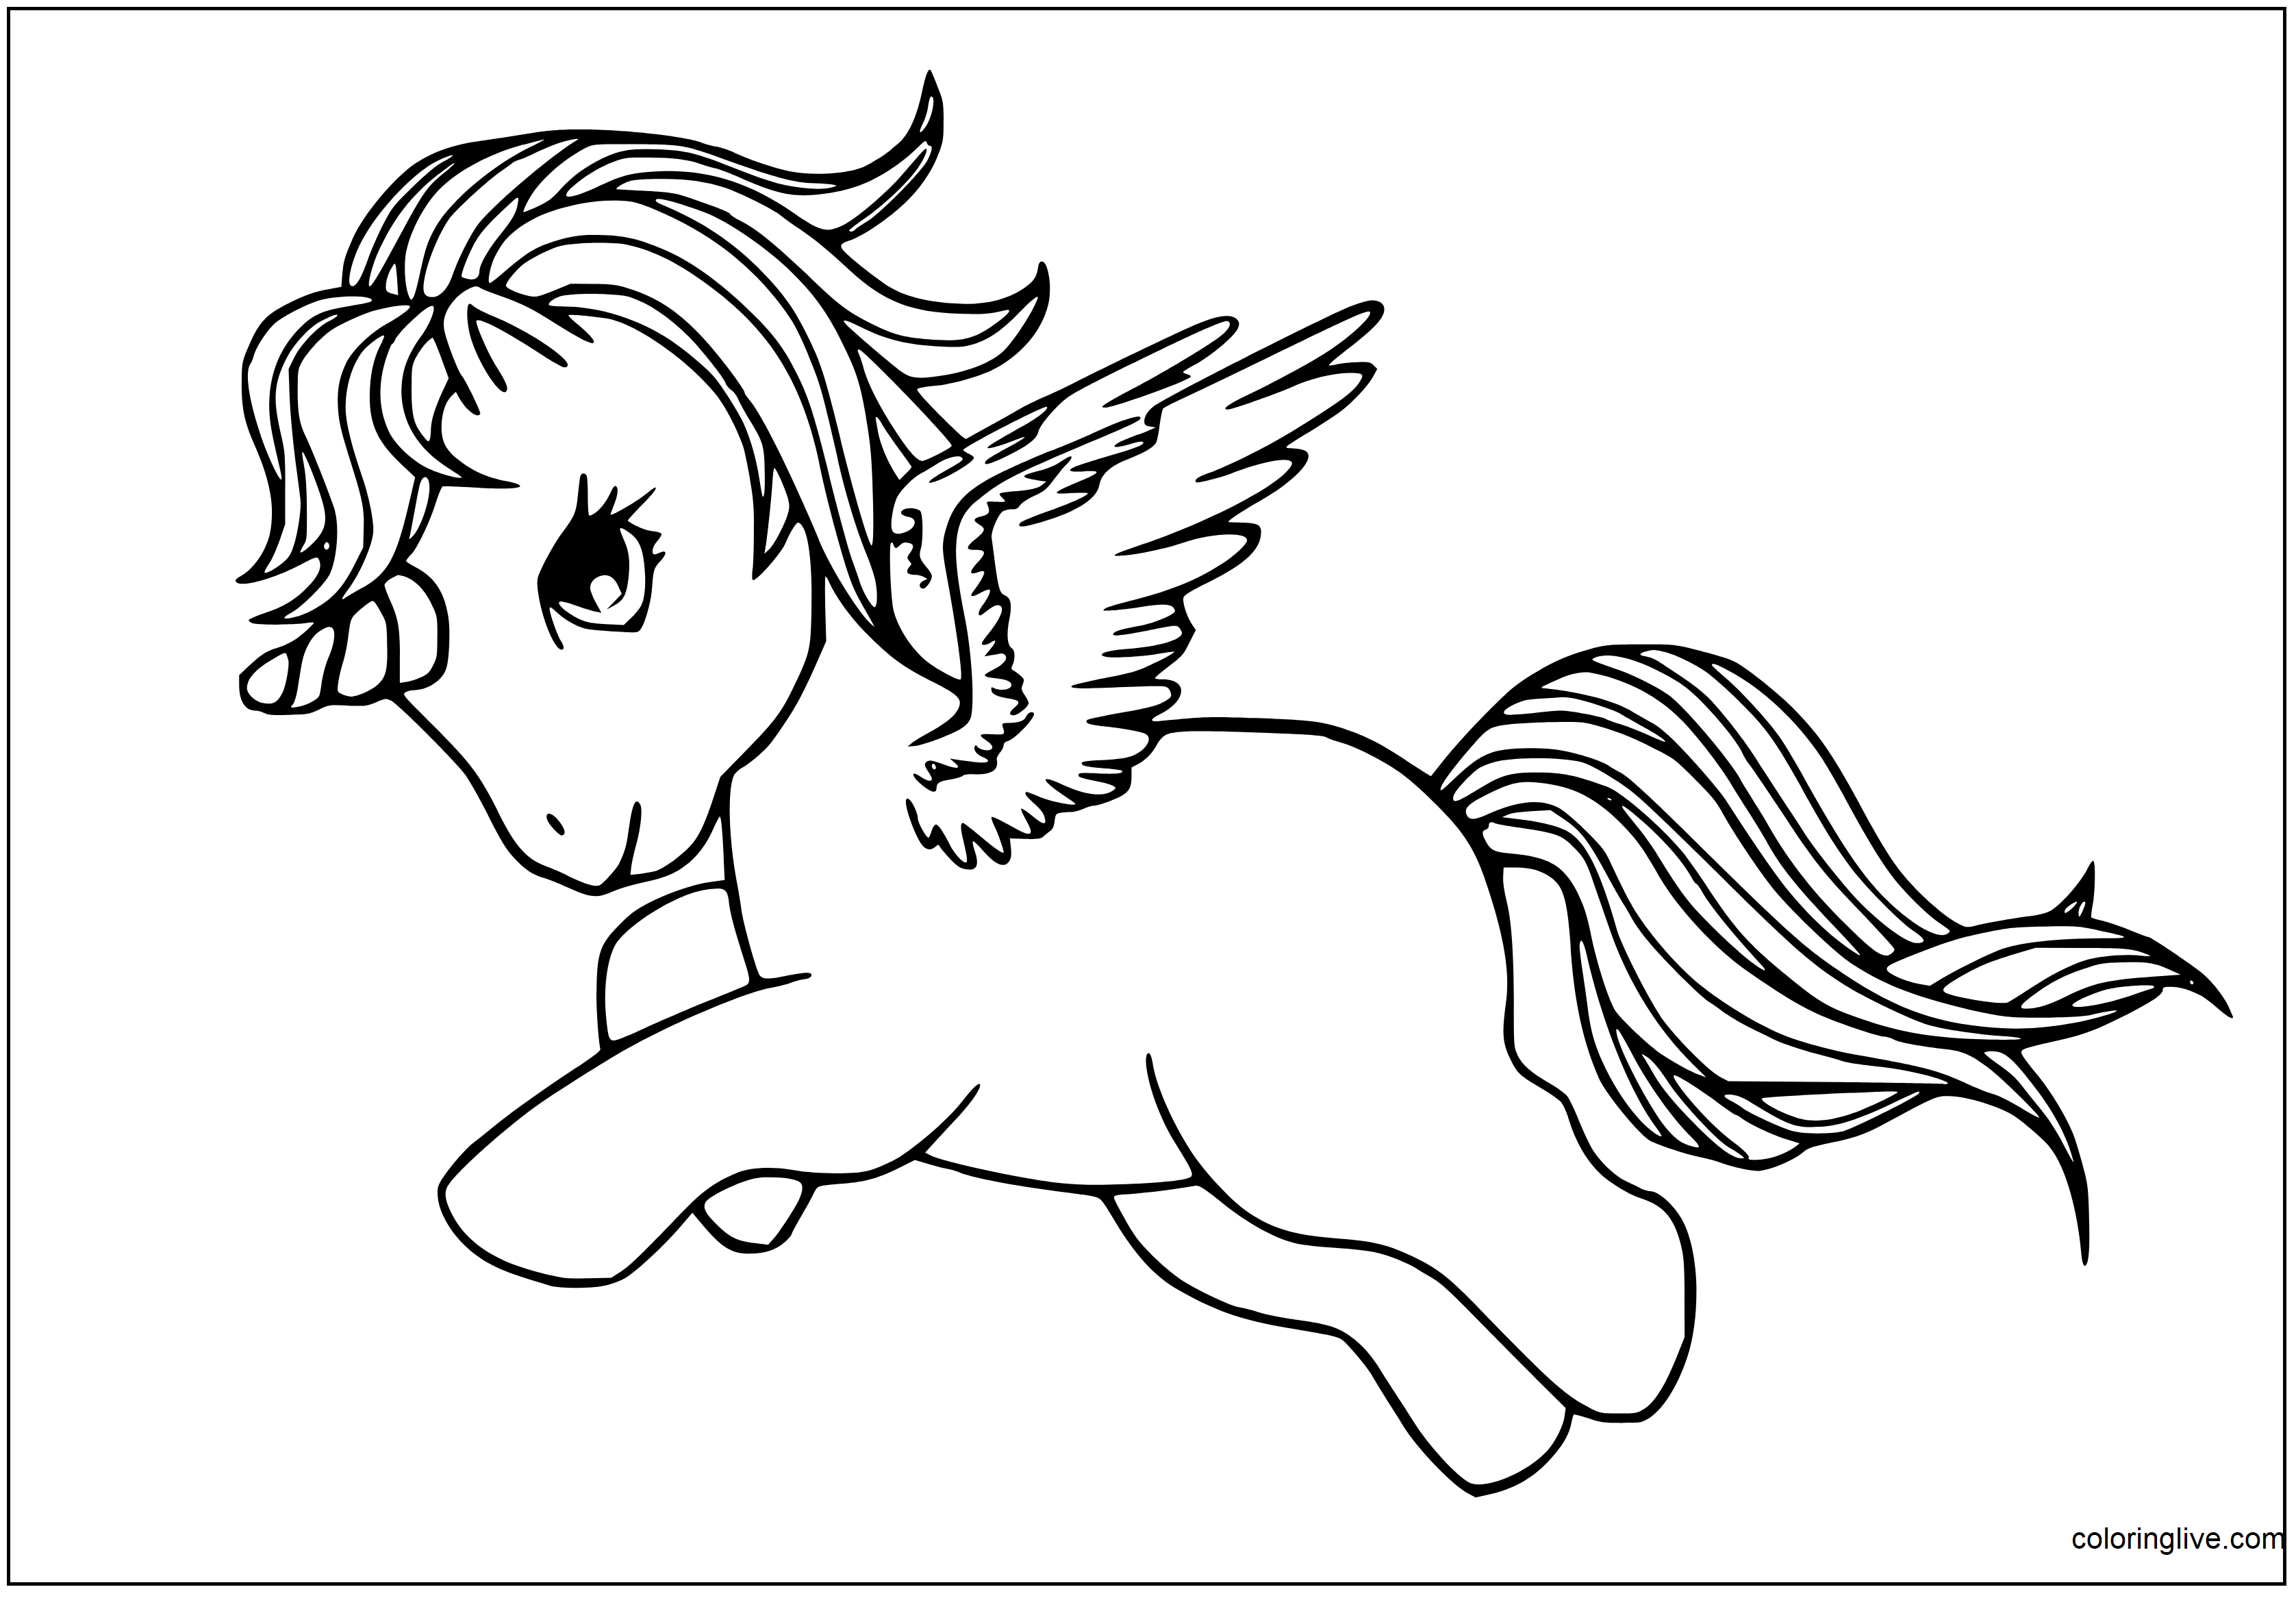 Printable Baby alicorn Coloring Page for kids.